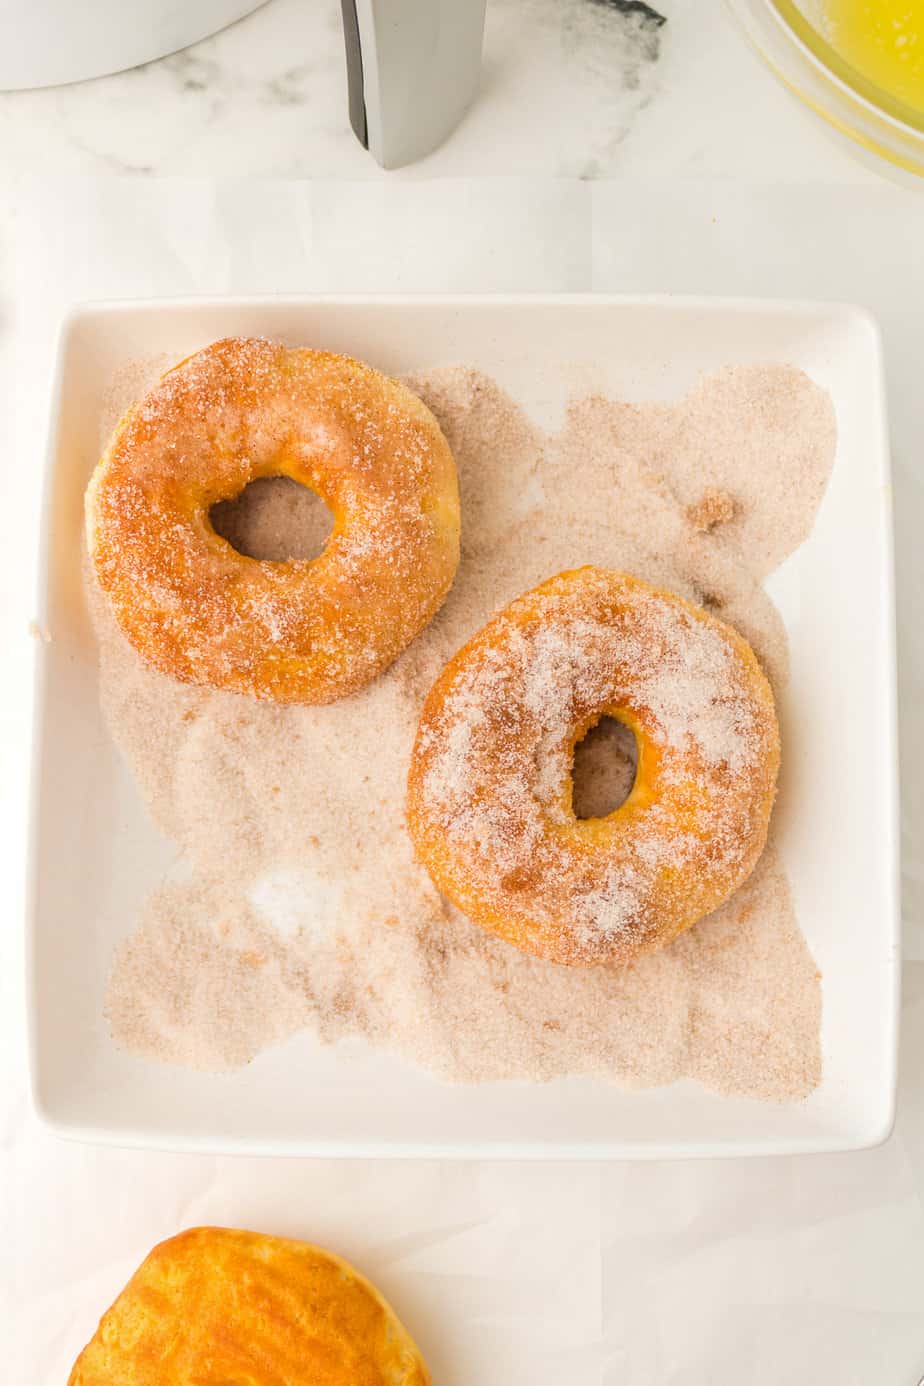 Two donuts being rolled in cinnamon sugar in a shallow square bowl from above on a counter.